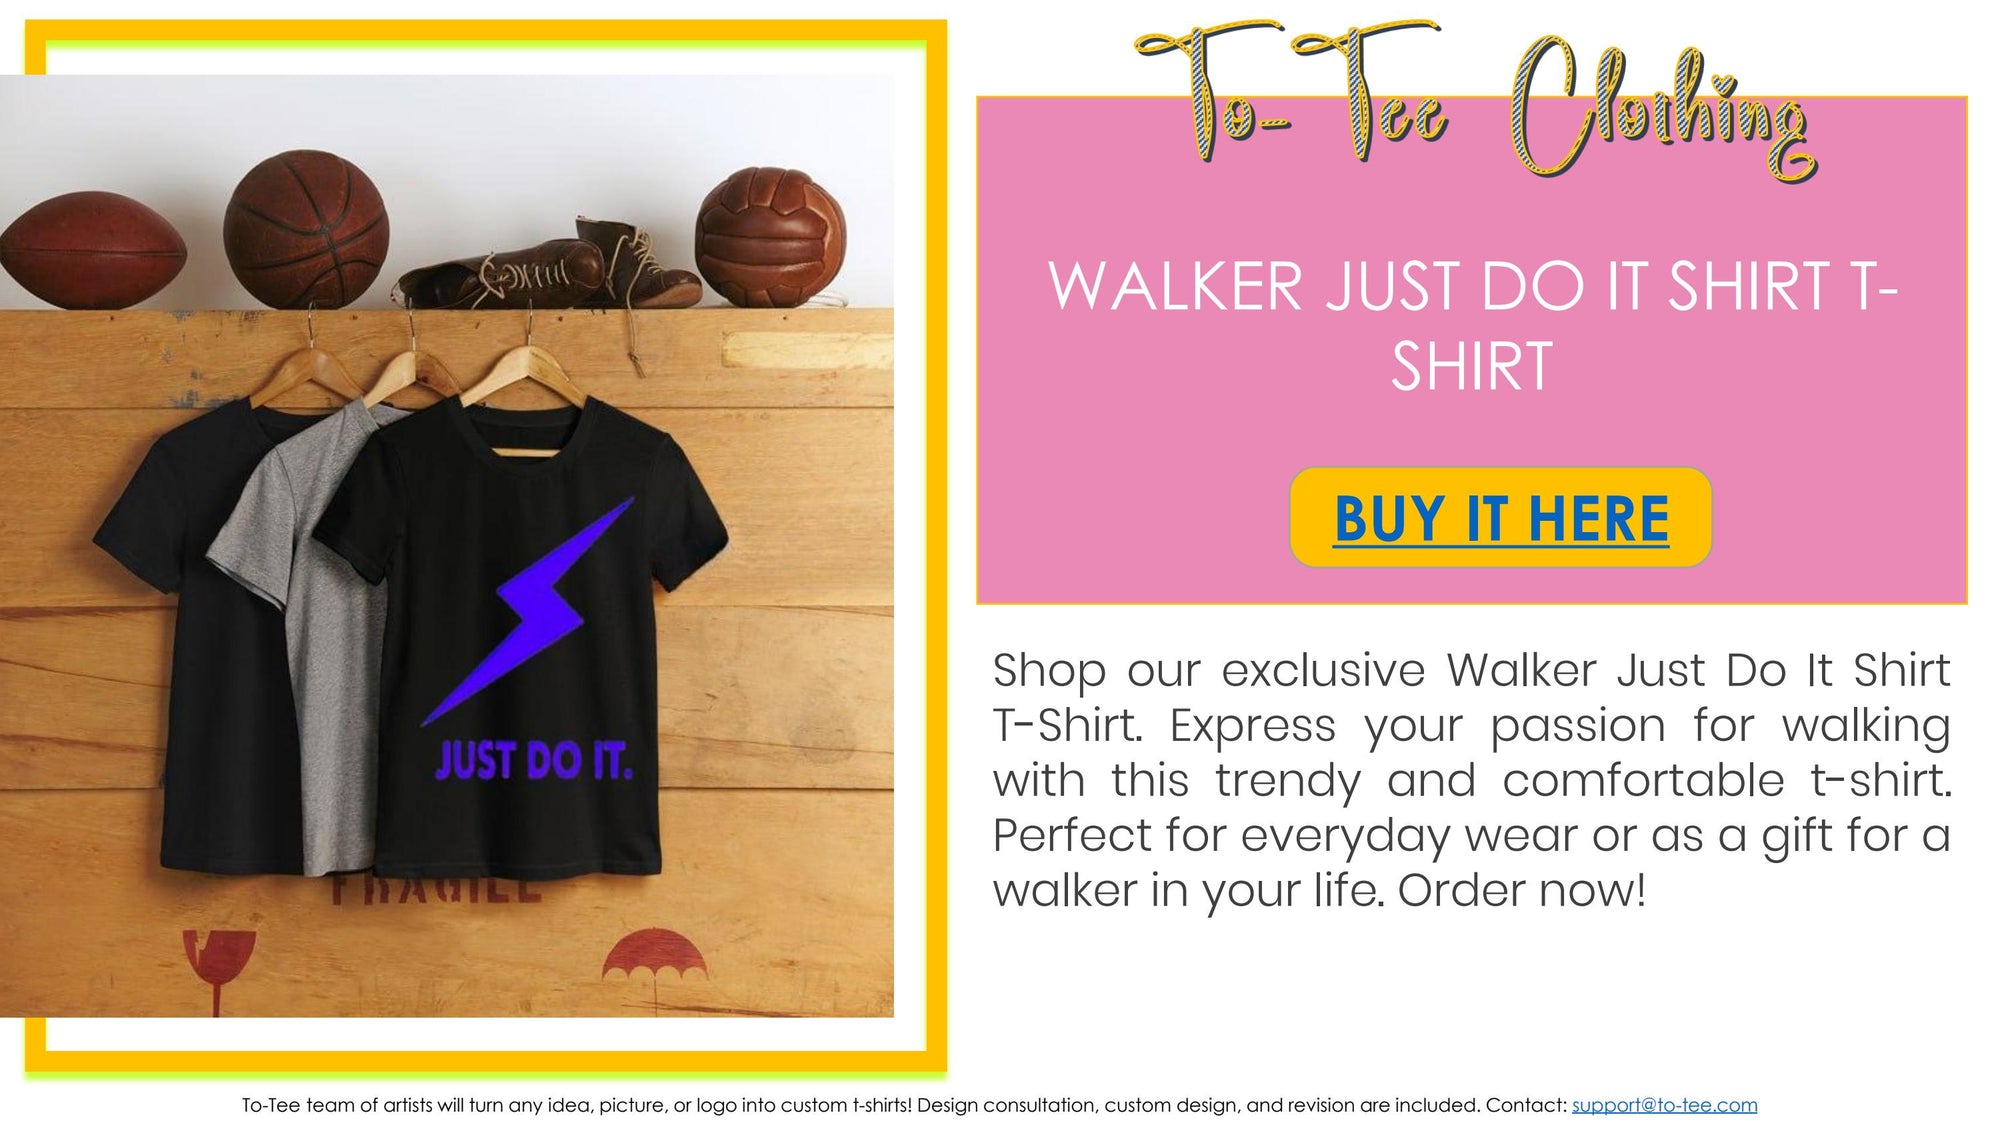 Stylish And Comfortable 'Just Do It' Tee Shirt For Everyday Wear